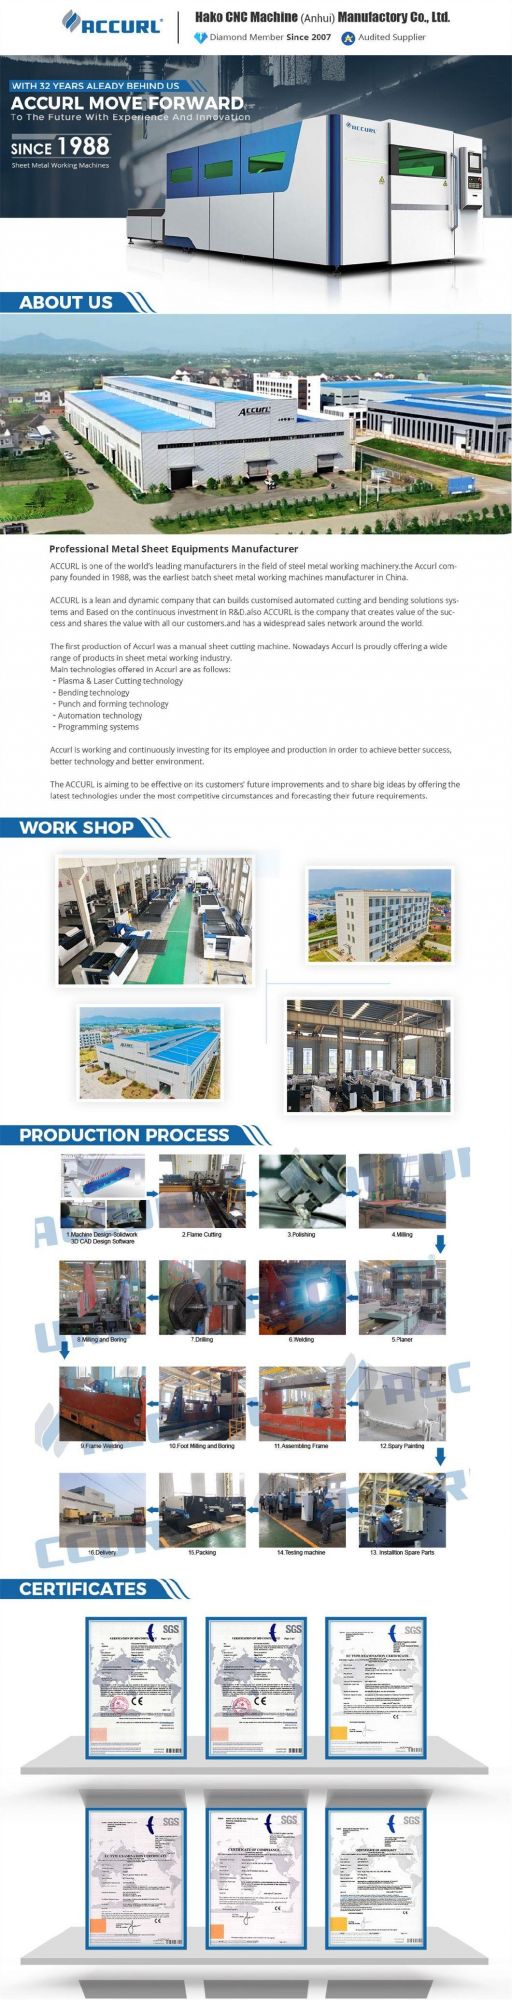 1500 Tons H Frame Hydraulic Press Tools for Compression Moulding of SMC Sheet 1500t H Type Hydraulic Press Machine